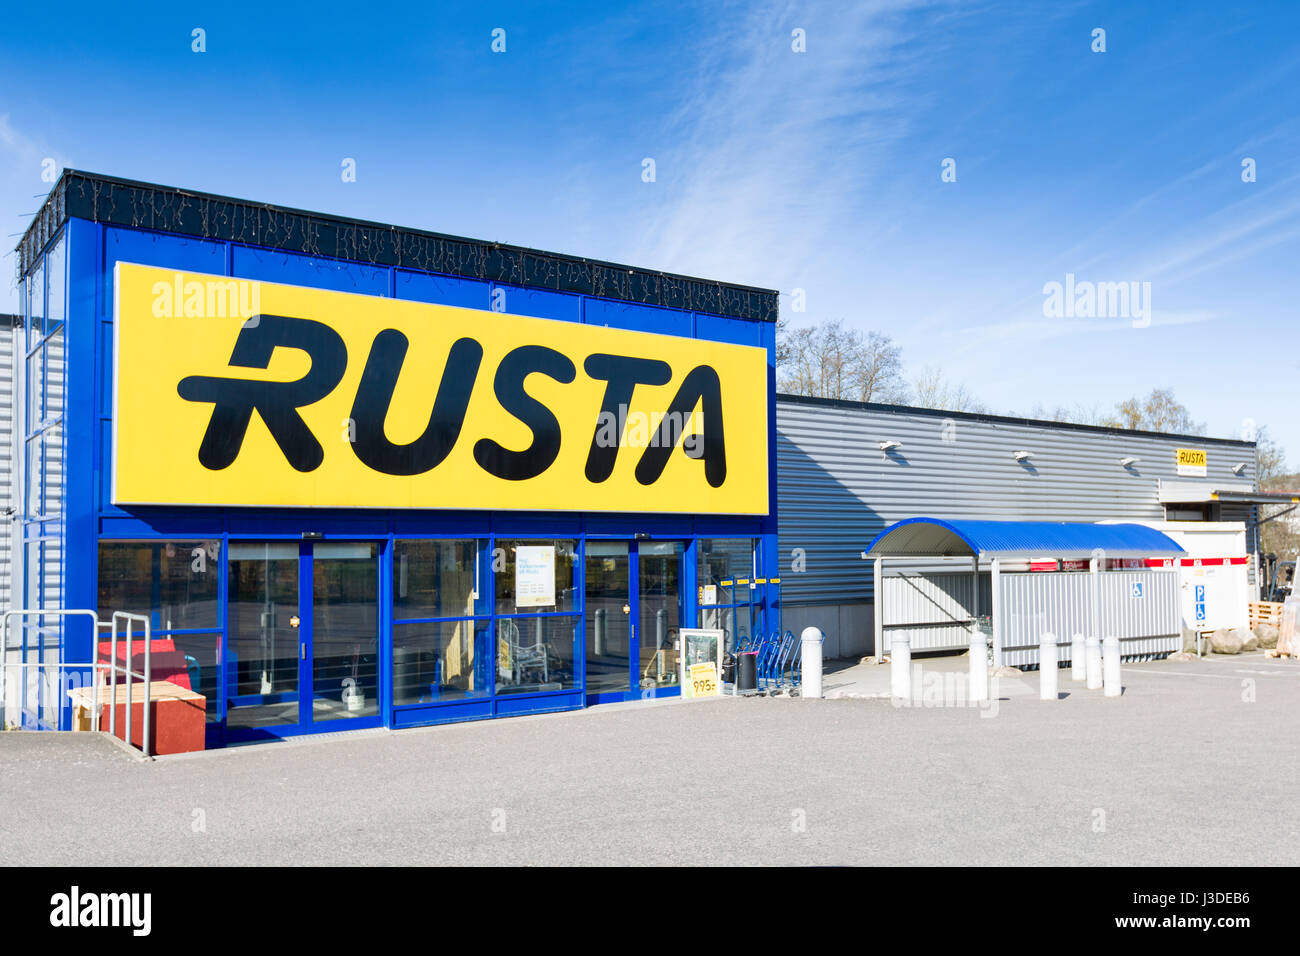 Rusta the Swedish chain of shops with DIY products, furniture, leisure  goods and consumables Model Release: No. Property Release: No Stock Photo -  Alamy